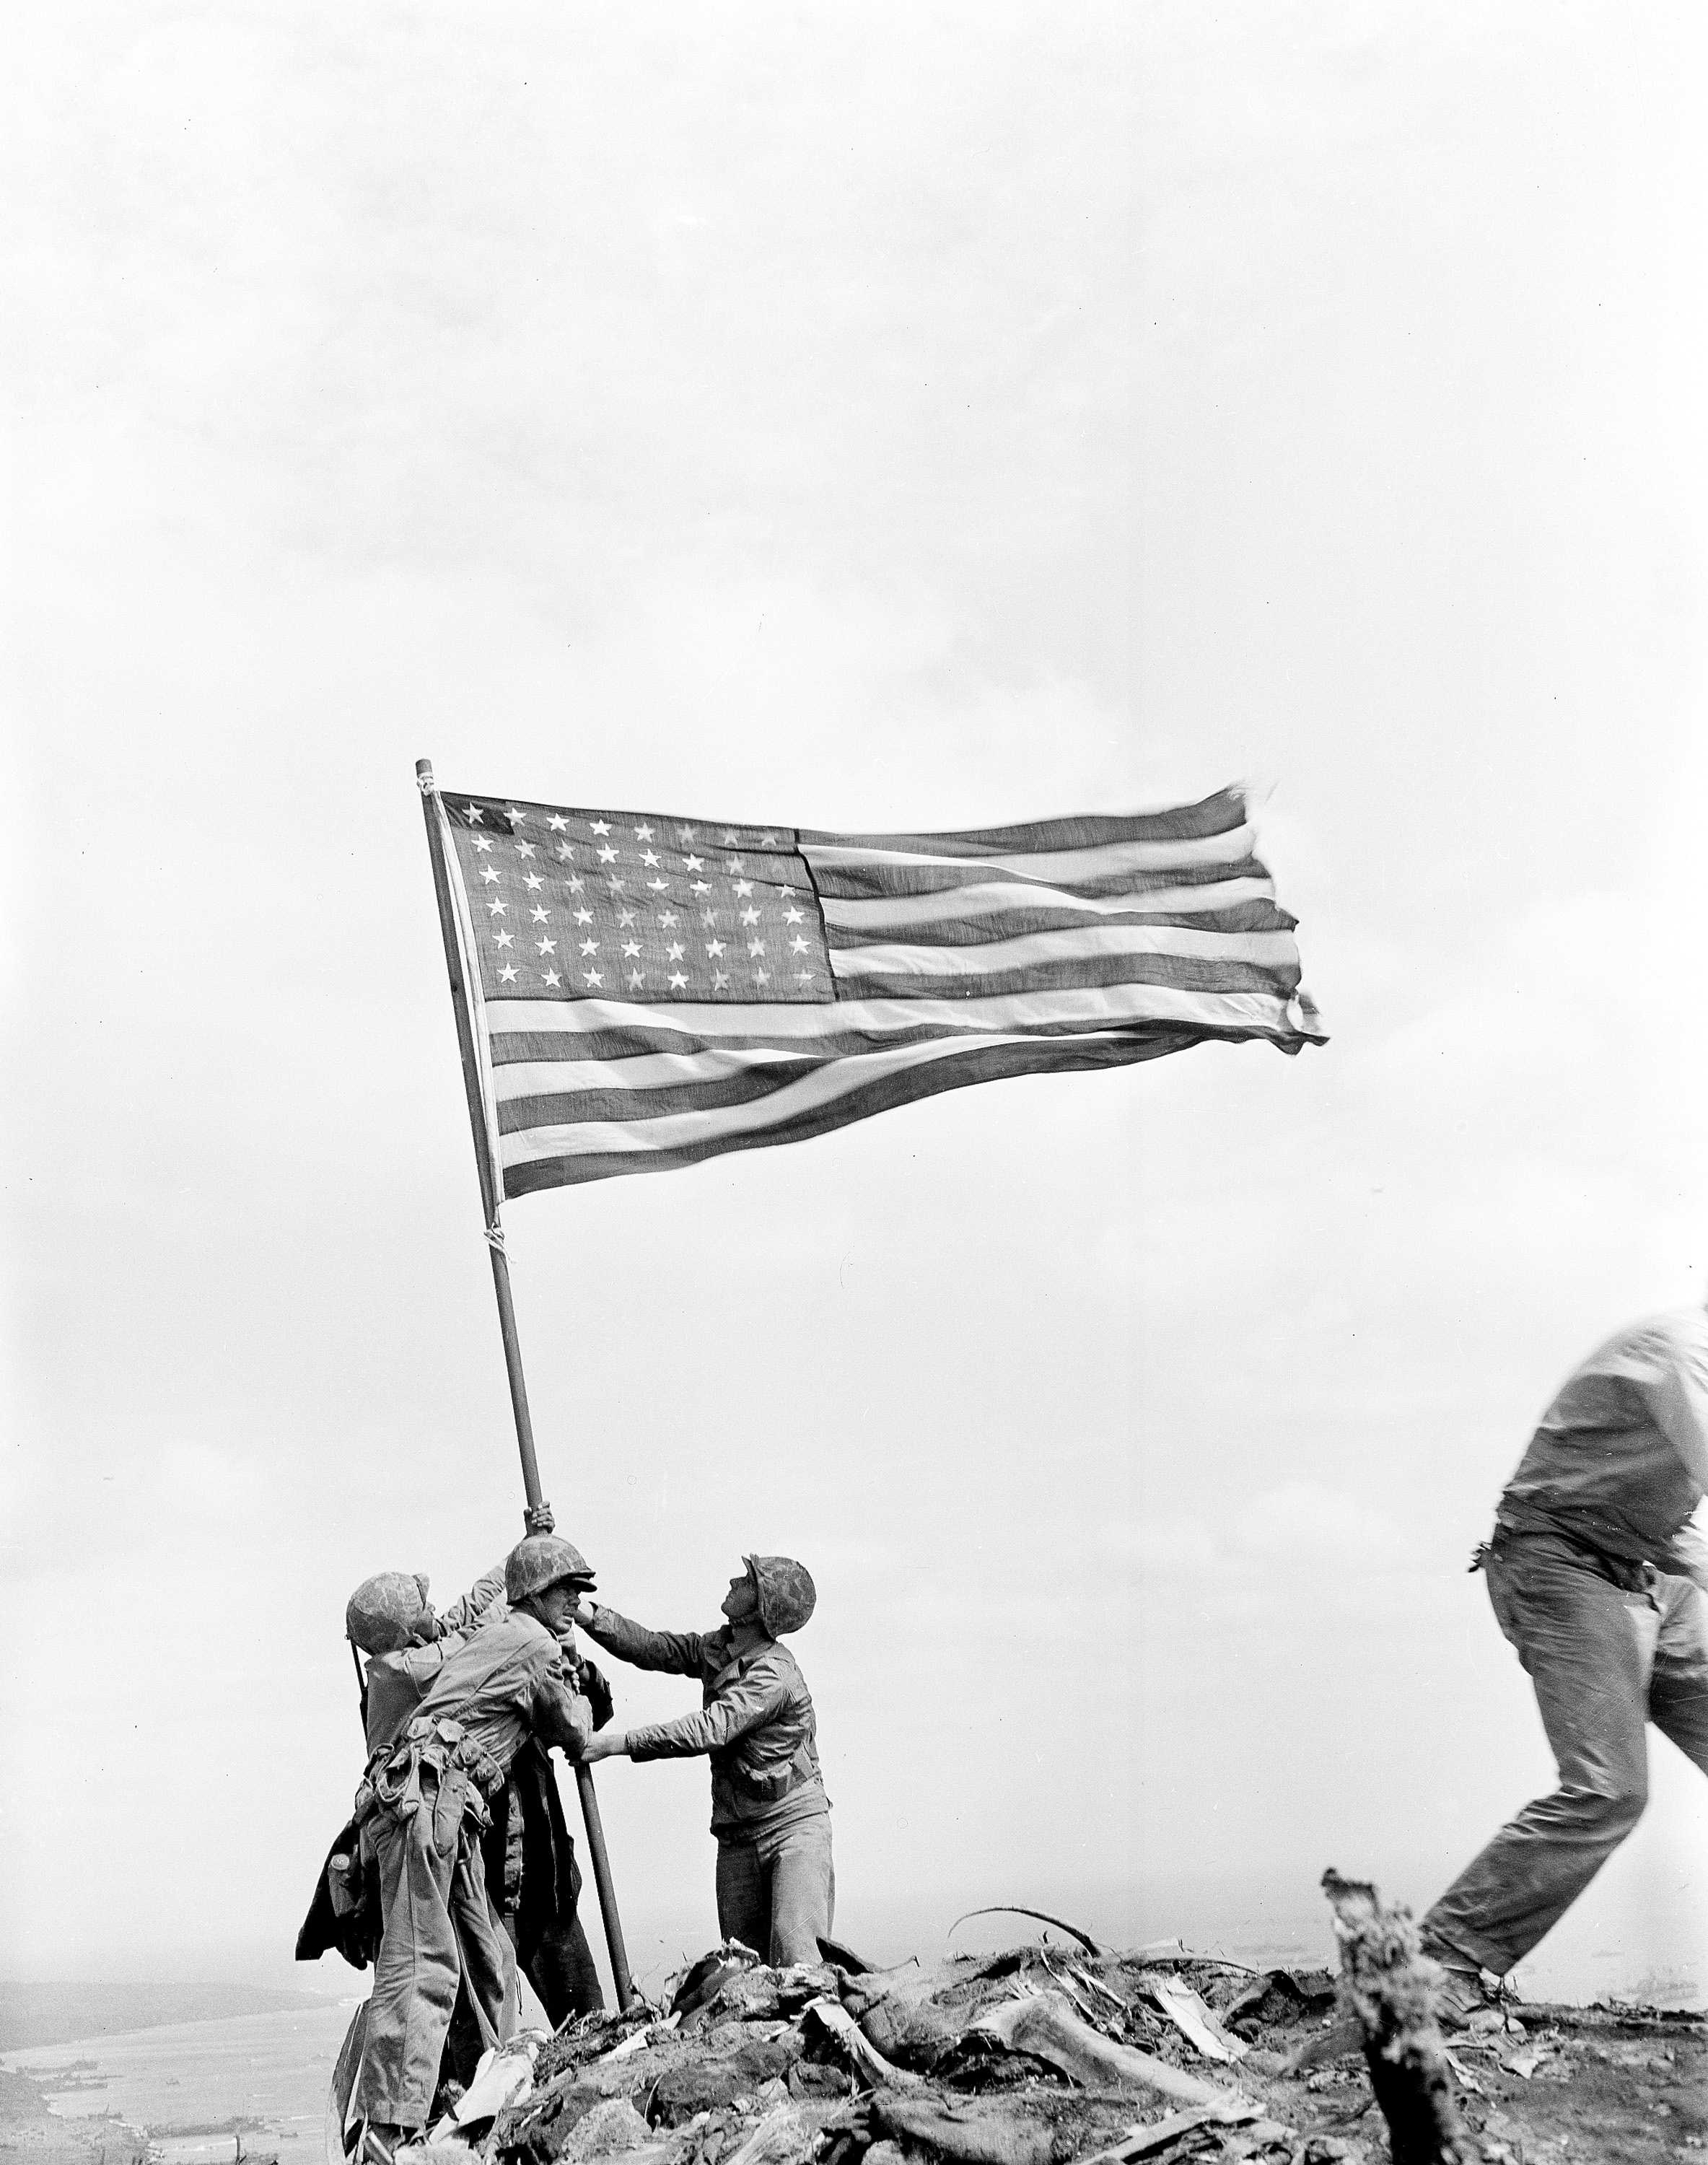 U.S. Marines of the 28th Regiment of the Fifth Division raise the American flag after capturing the 550-foot Mt. Suribachi on Iwo Jima, the largest Volcano Islands of Japan, on Feb. 23, 1945 during World War II.  (AP Photo/Joe Rosenthal)